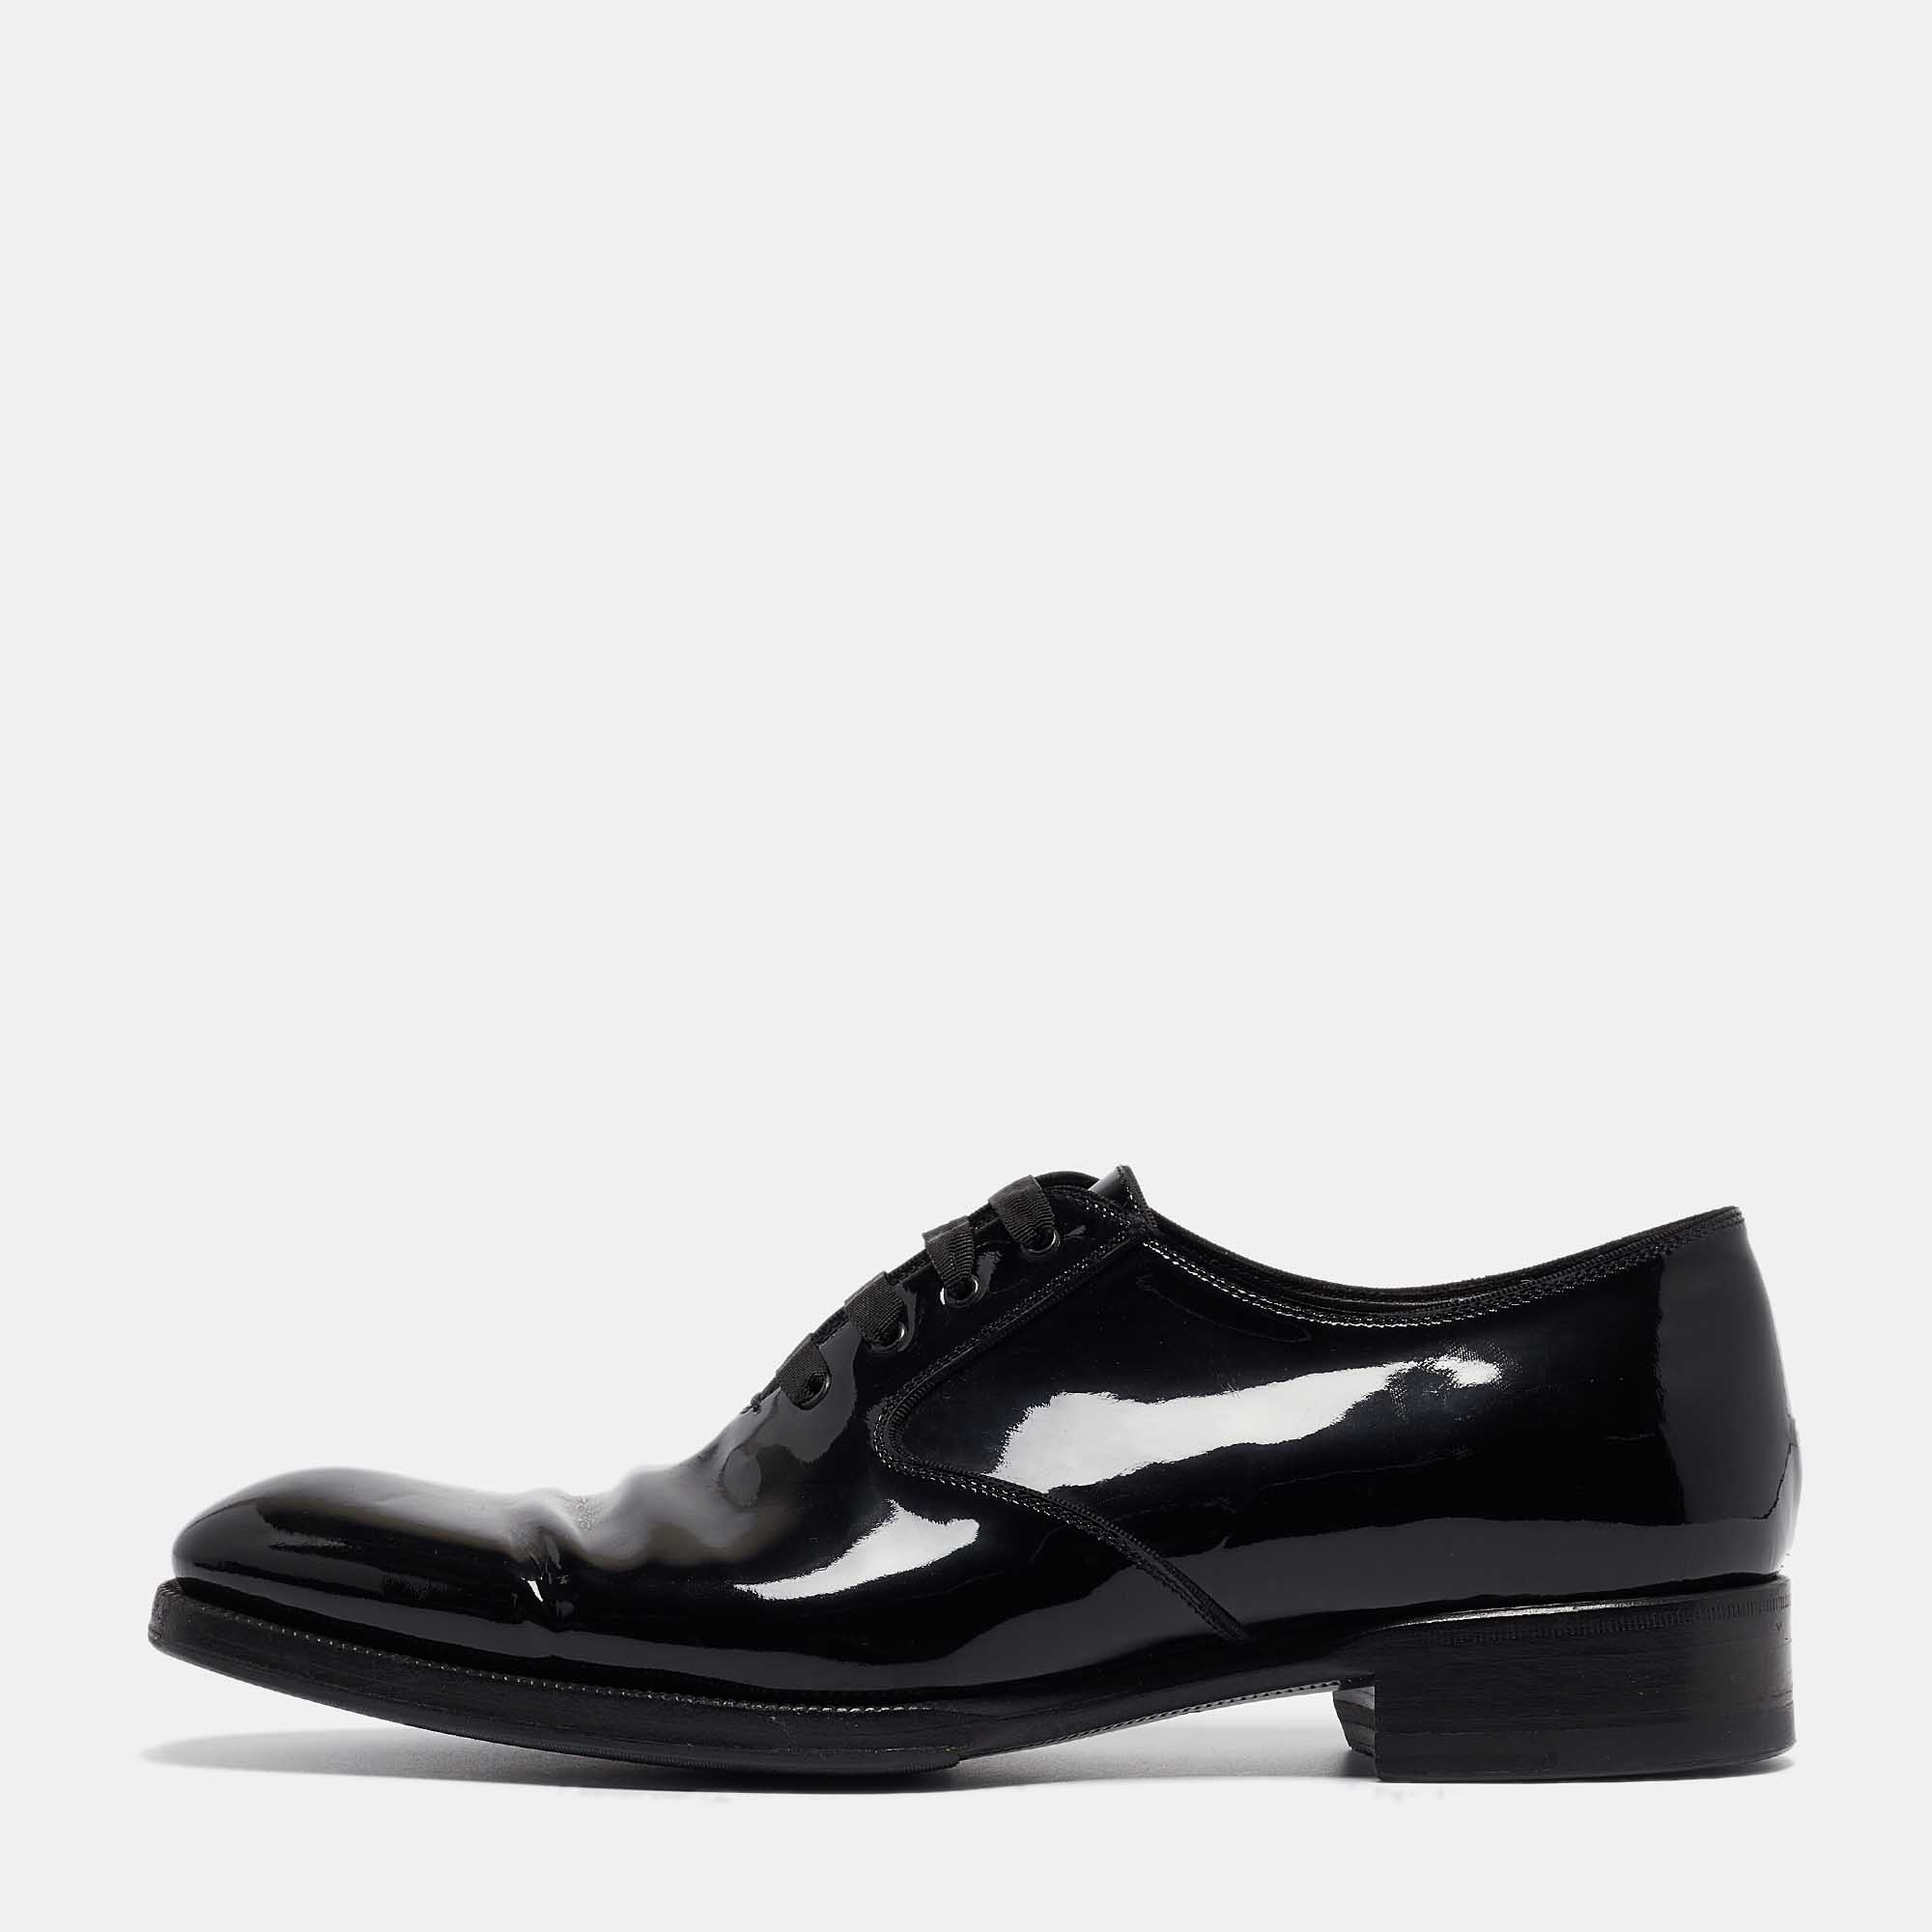 Black Patent Leather Up Oxfords